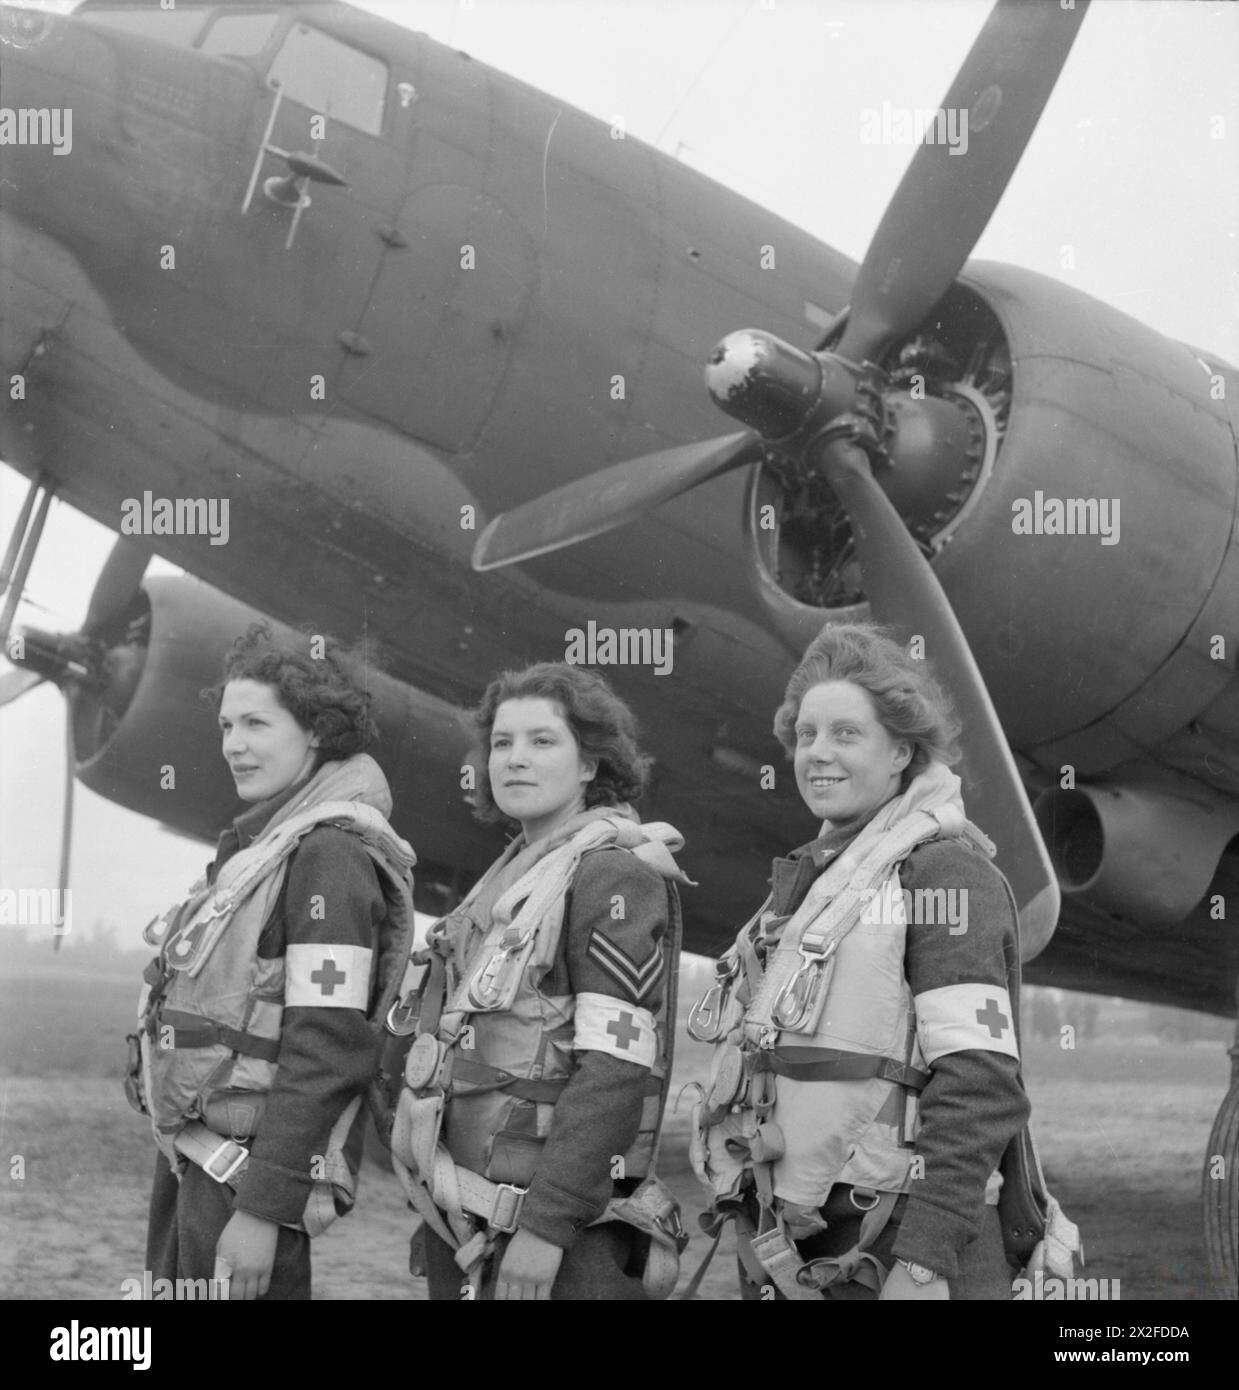 ROYAL AIR FORCE TRANSPORT COMMAND, 1943-1945. - The first WAAF nursing orderlies selected to fly on air-ambulance duties to France, standing in front of a Douglas Dakota Mark III of No. 233 Squadron RAF at B2/Bazenville, Normandy. From left to right: Leading Aircraftwoman Myra Roberts of Oswestry, Corporal Lydia Alford of Eastleigh and Leading Aircraftwoman Edna Birbeck of Wellingborough Royal Air Force, Maintenance Unit, 235, Royal Air Force, Women's Auxiliary Air Force Stock Photo